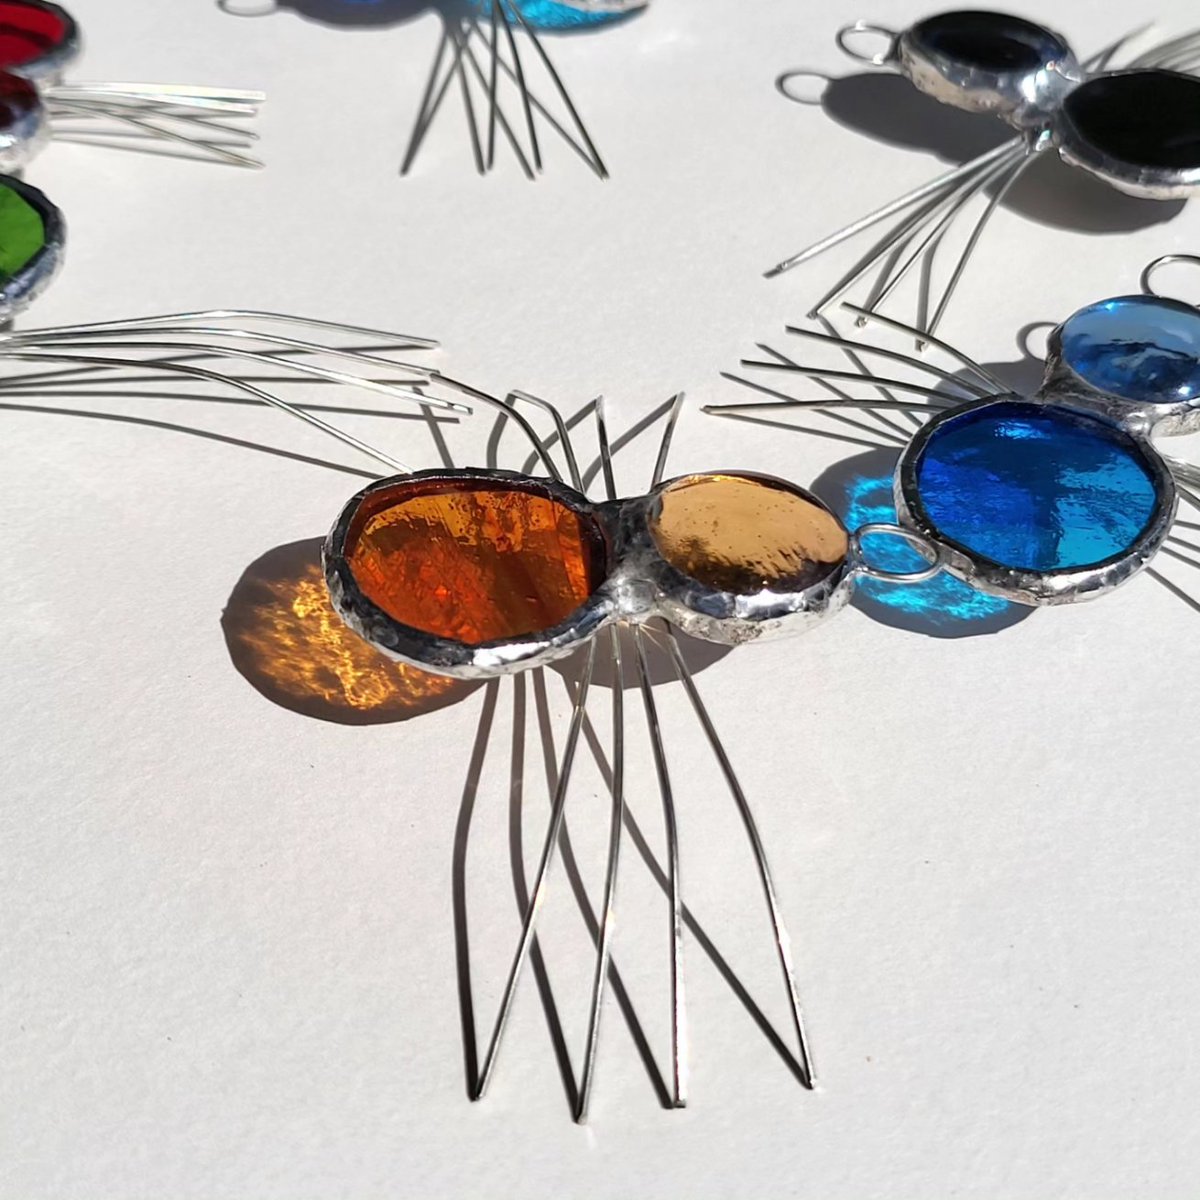 Decided to have a change from the bigger project I'm working on.  #stainedglass #copperfoil #madeinnorfolk #madebyme #spiders